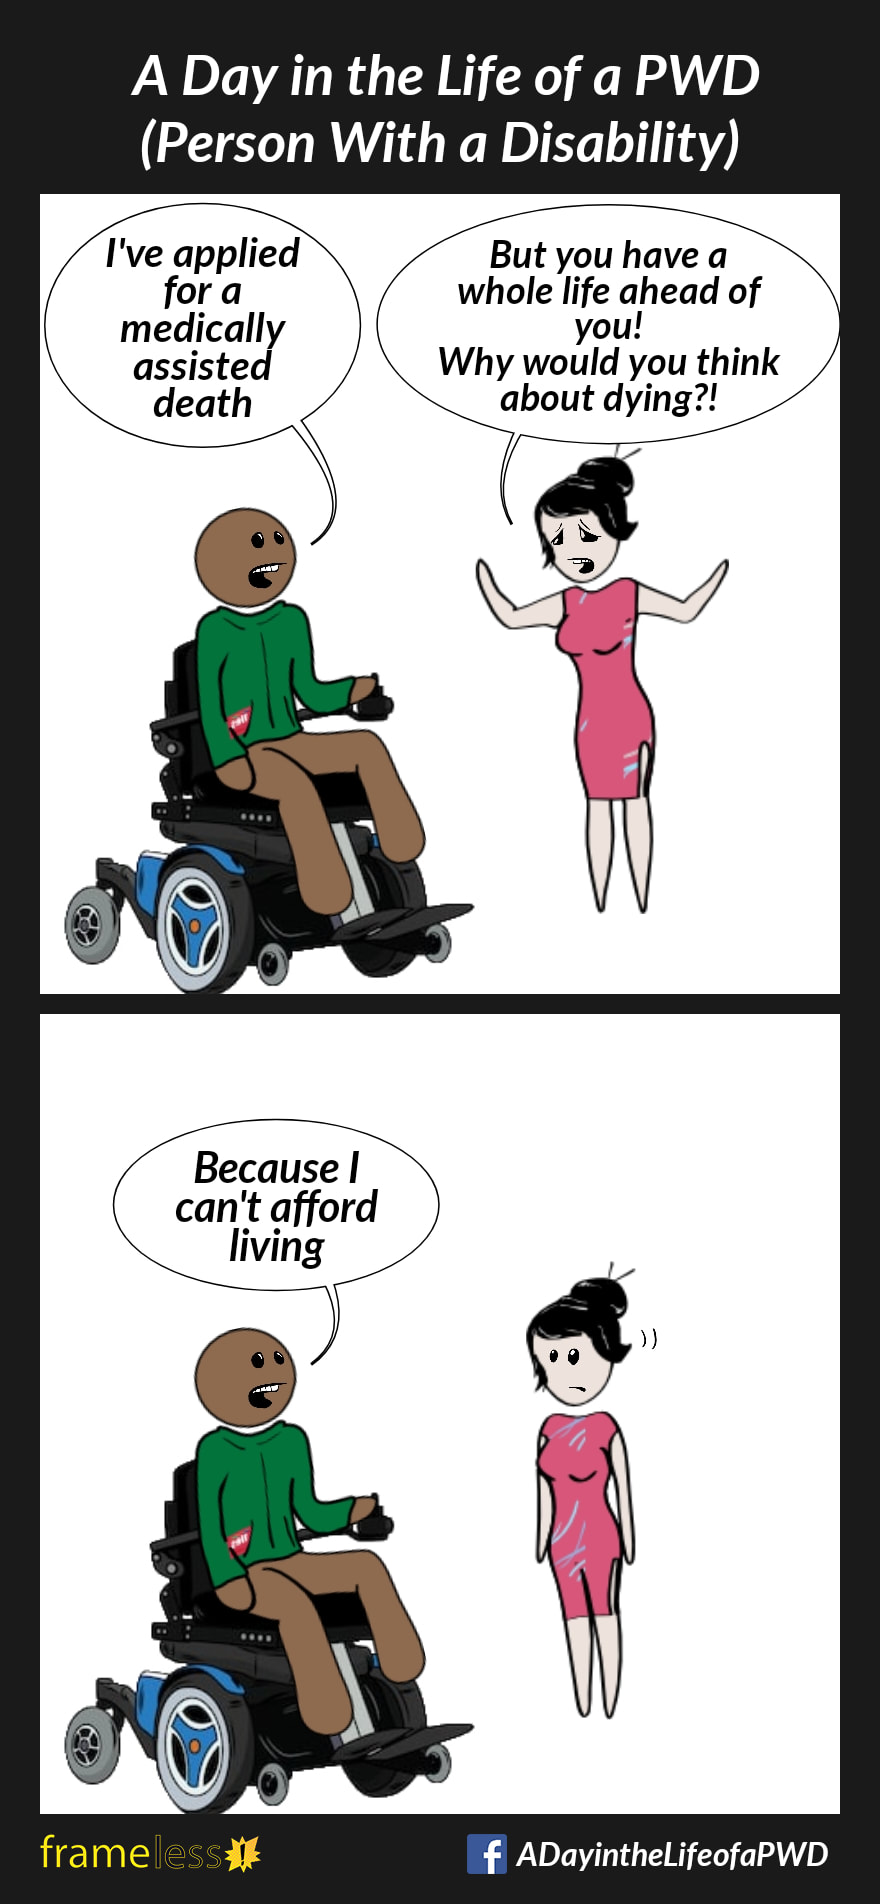 COMIC STRIP 
A Day in the Life of a PWD (Person With a Disability) 

Frame 1:
A man in a power wheelchair is talking to a friend.
MAN: I've applied for a medically assisted death 
WOMAN (in distress): But you have a whole life ahead of you! Why would you think about dying?!

Frame 2:
MAN: Because I can't afford living